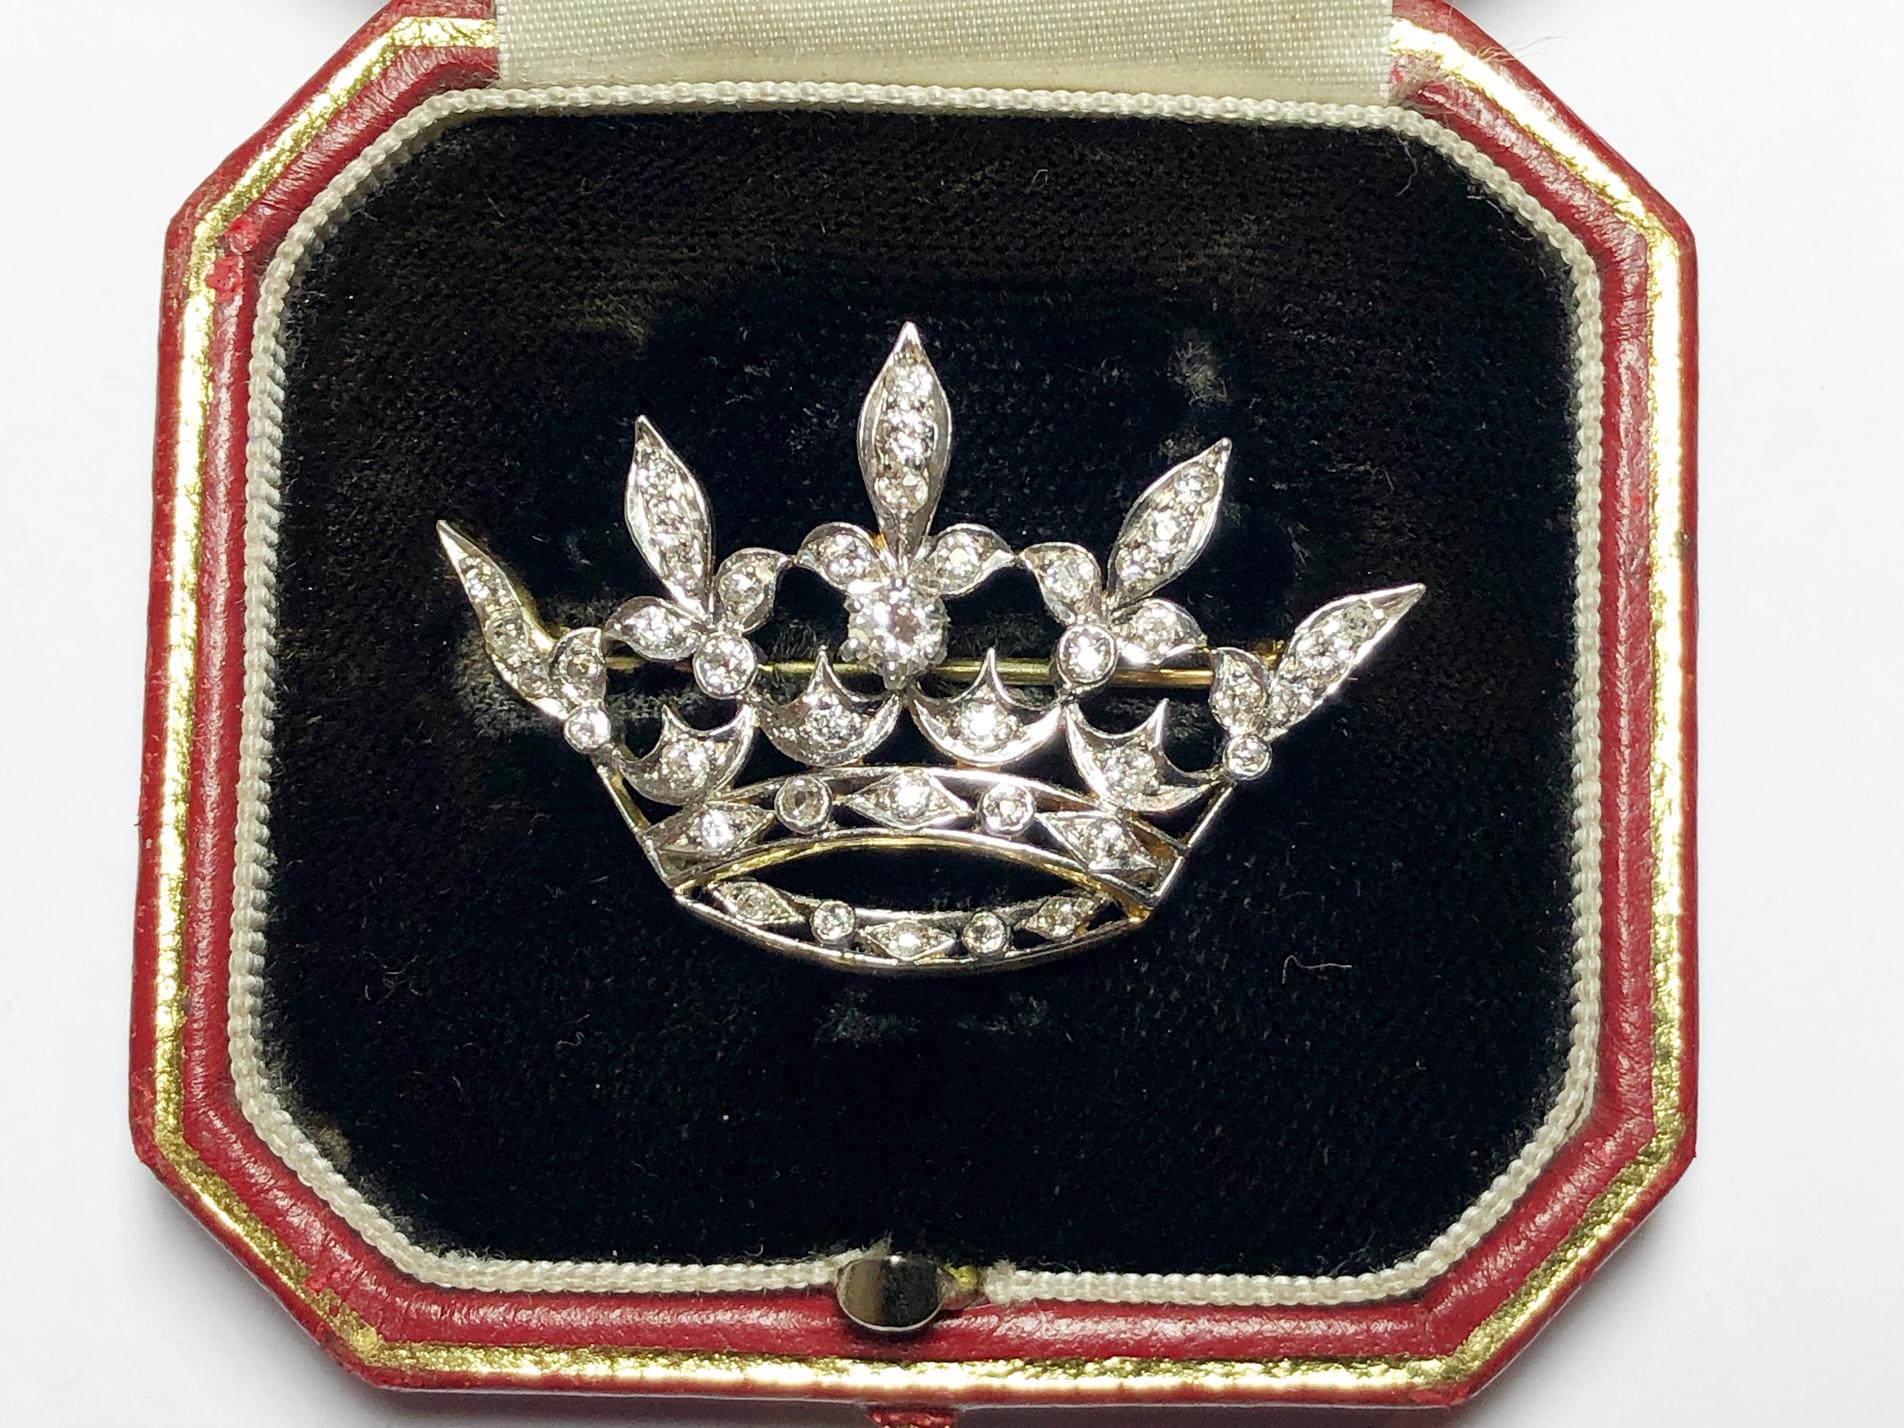 An antique diamond crown brooch, set with Edwardian and old-cut diamonds, mounted in yellow gold with platinum settings, circa 1915.
